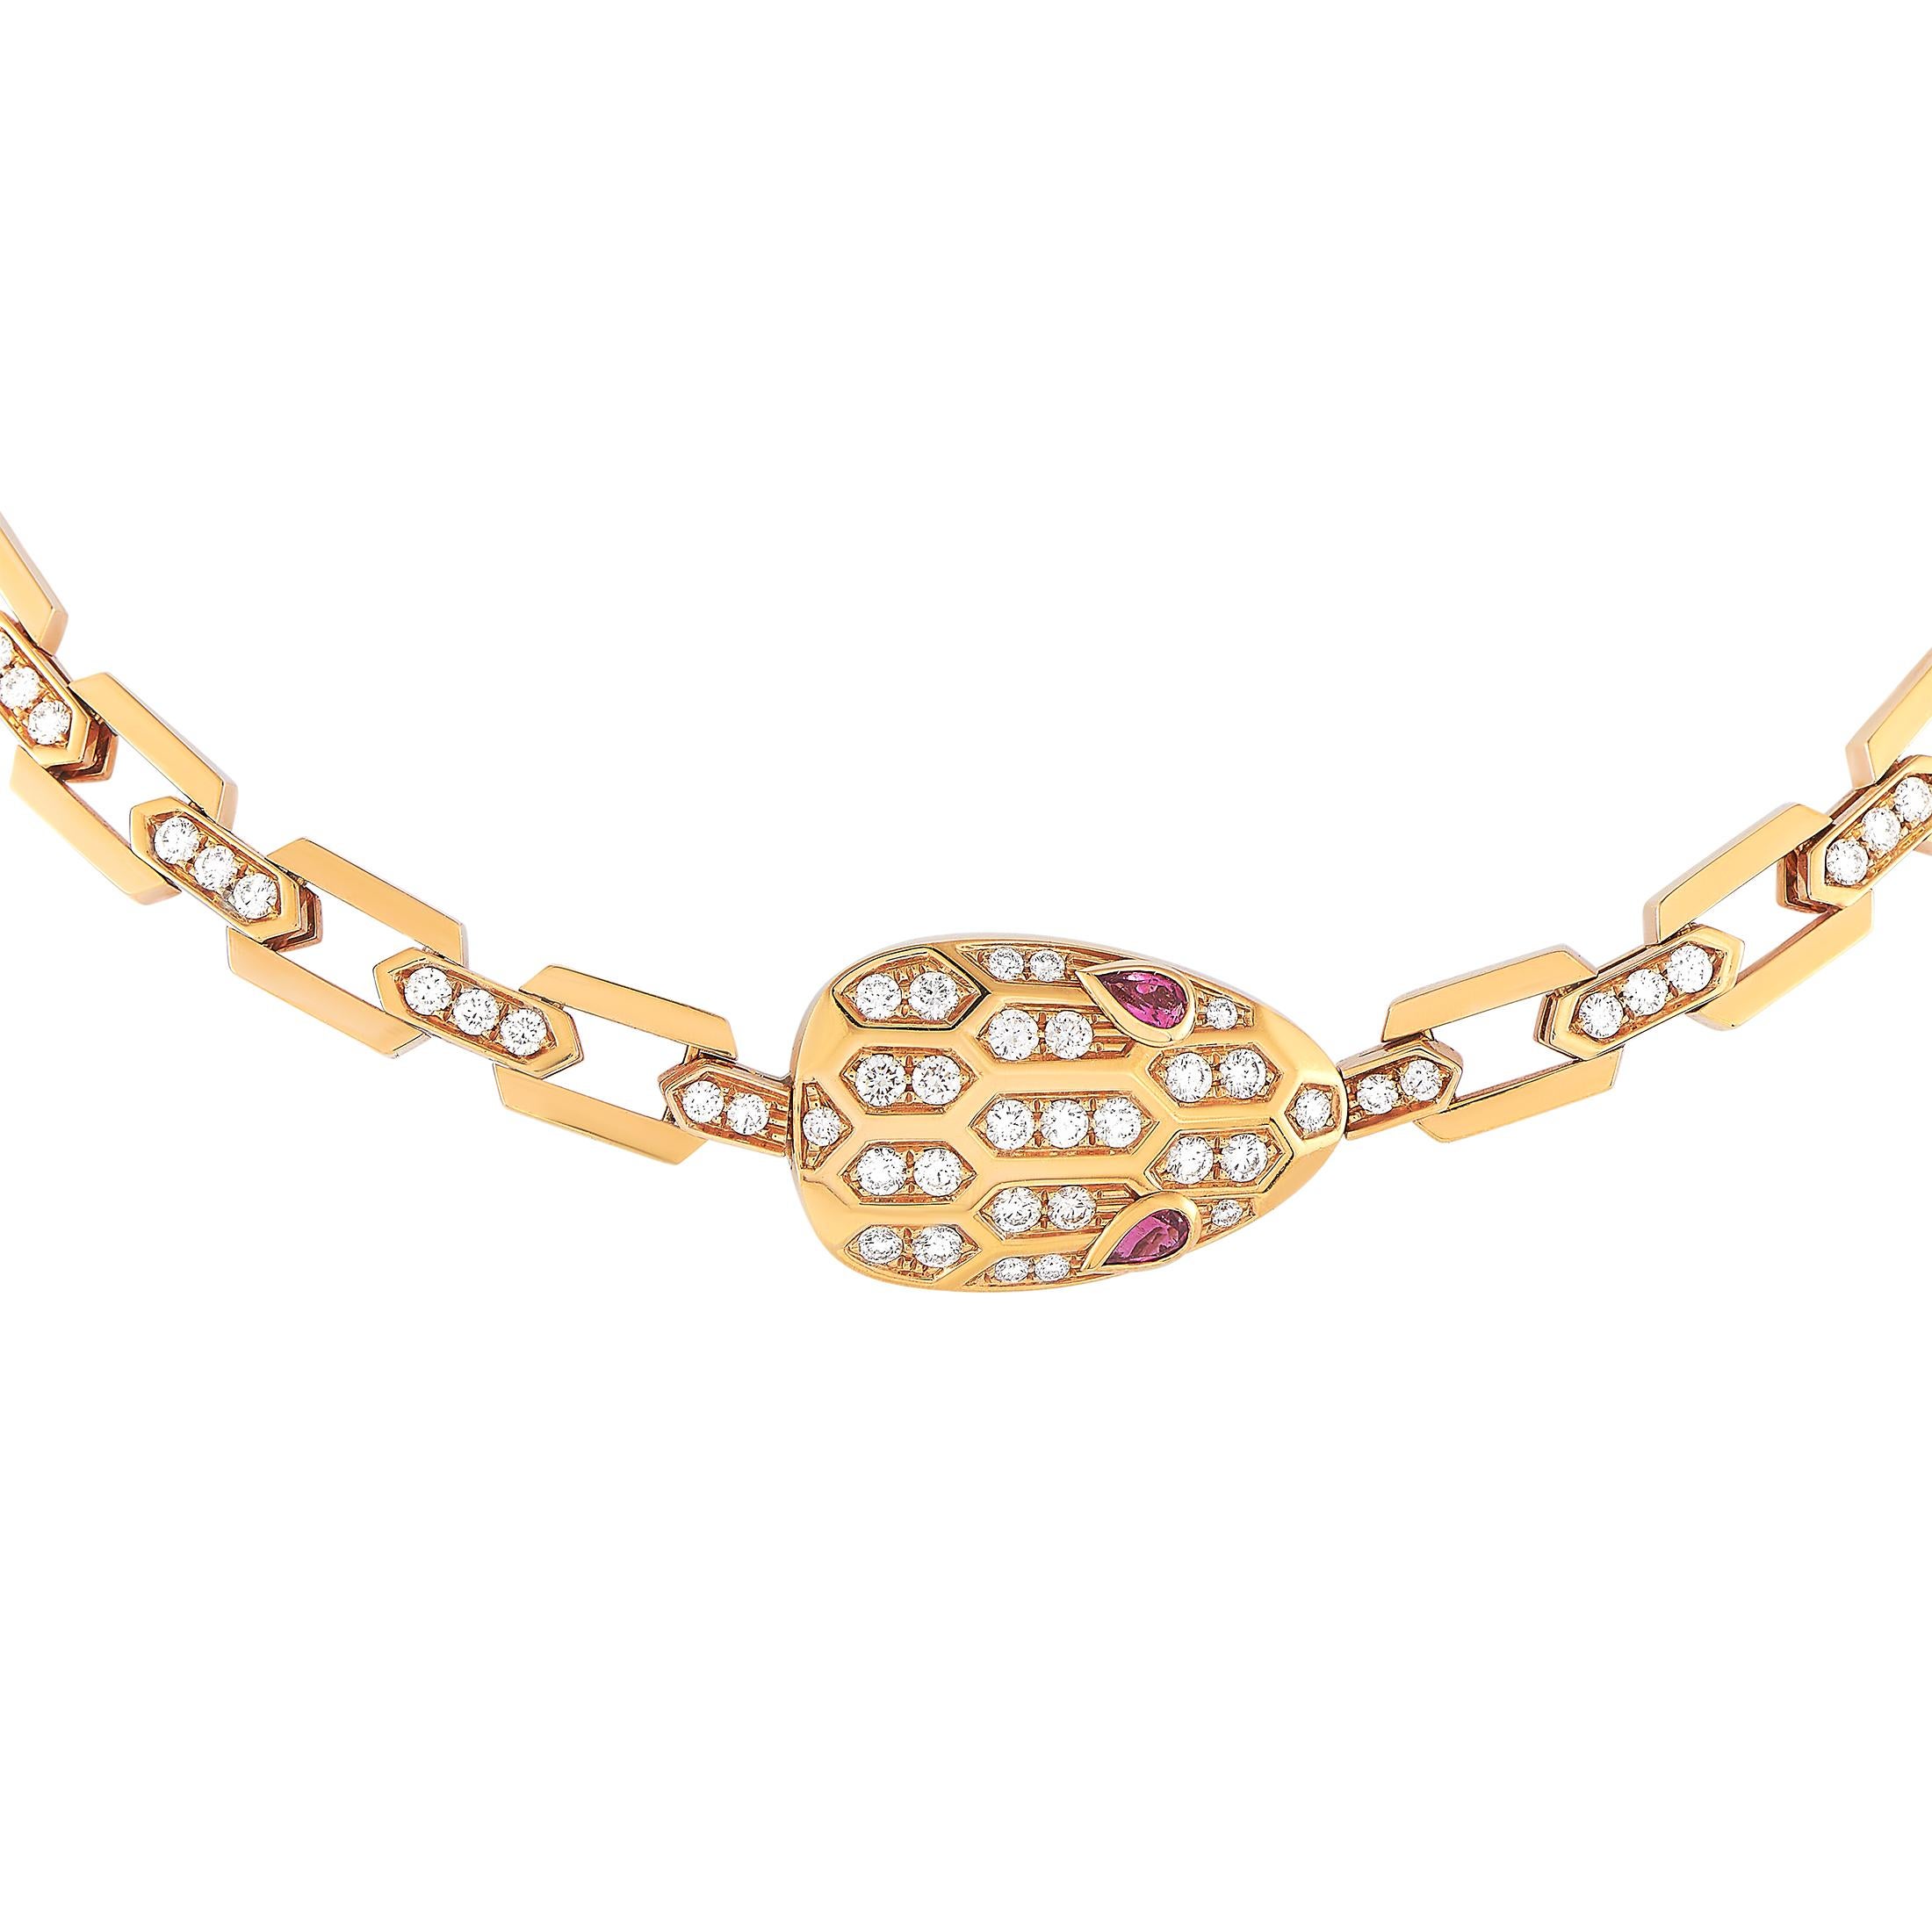 The Bvlgari “Serpenti” necklace is crafted from 18K rose gold and weighs 46.5 grams, measuring 15” in length. The necklace is embellished with diamonds that boast E color and VS clarity and amount to 3.31 carats.

This jewelry piece is offered in